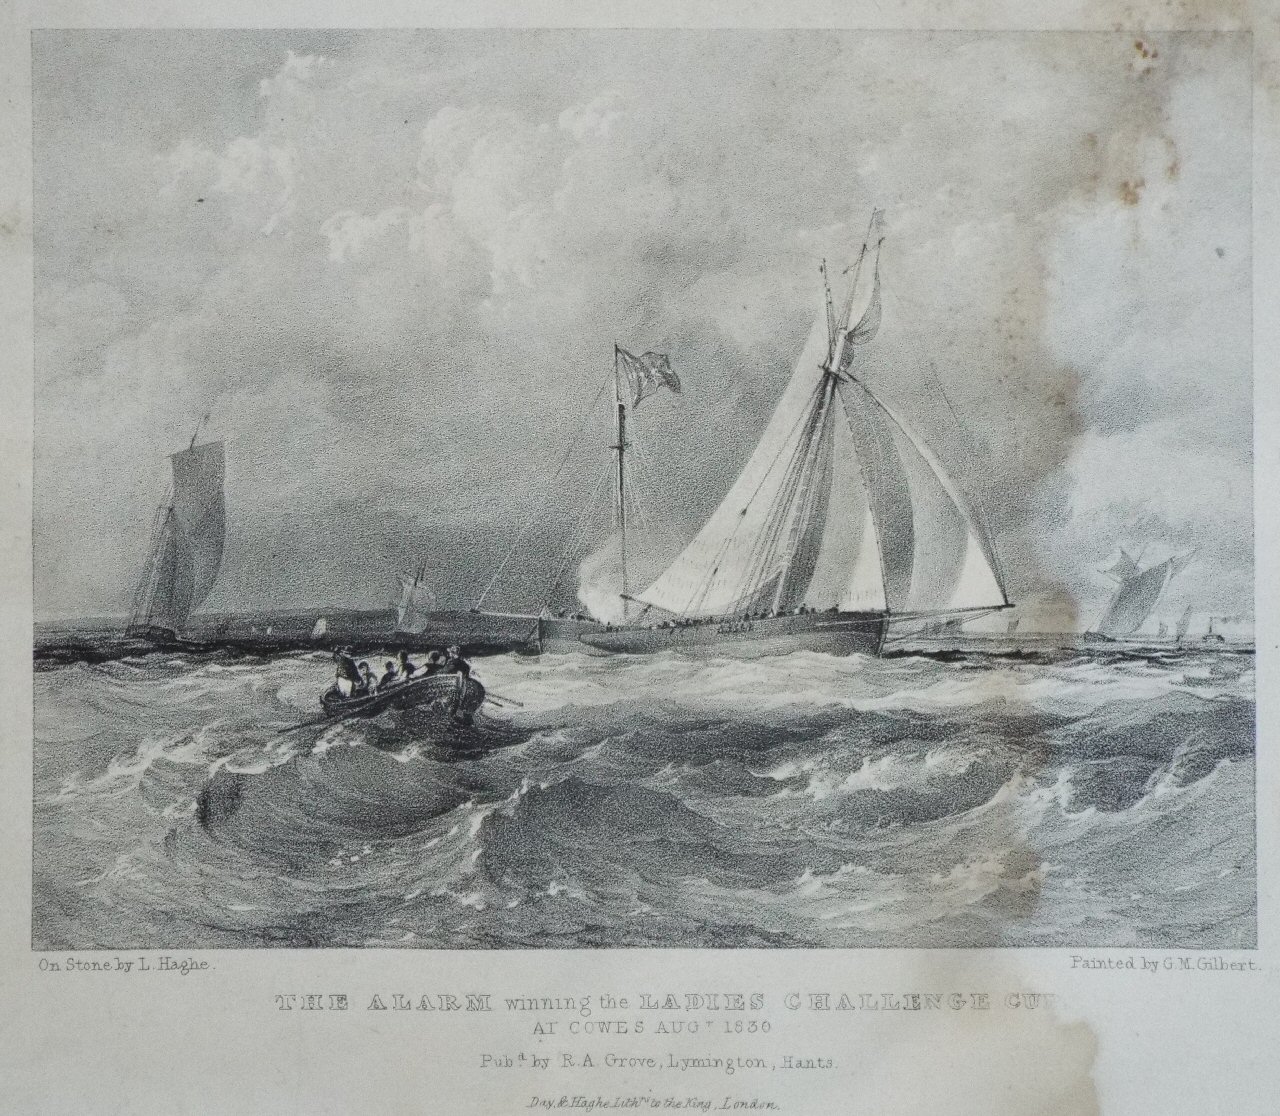 Lithograph - The Alarm winning the Ladies Challenge Cup at Cowes Augt. 1830 - Haghe